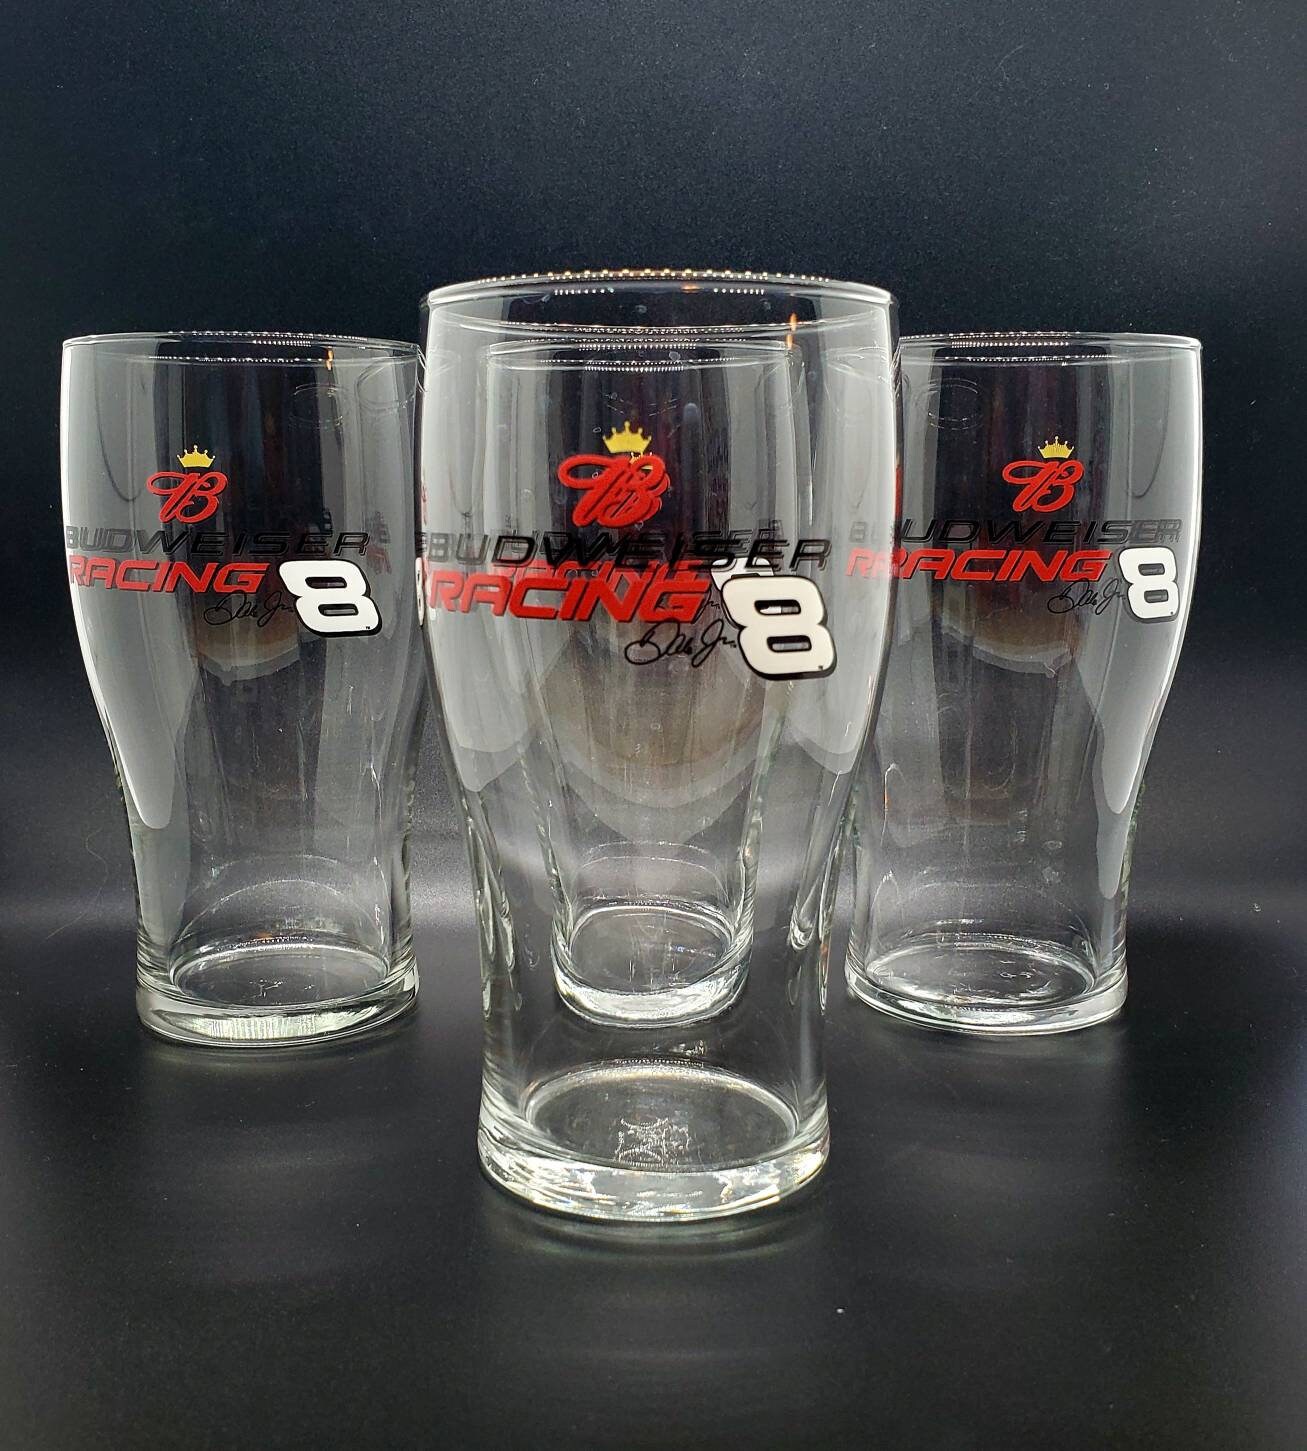 Budweiser Label Glasses Bar Ware Indiana Glass Set of 8 EUC in